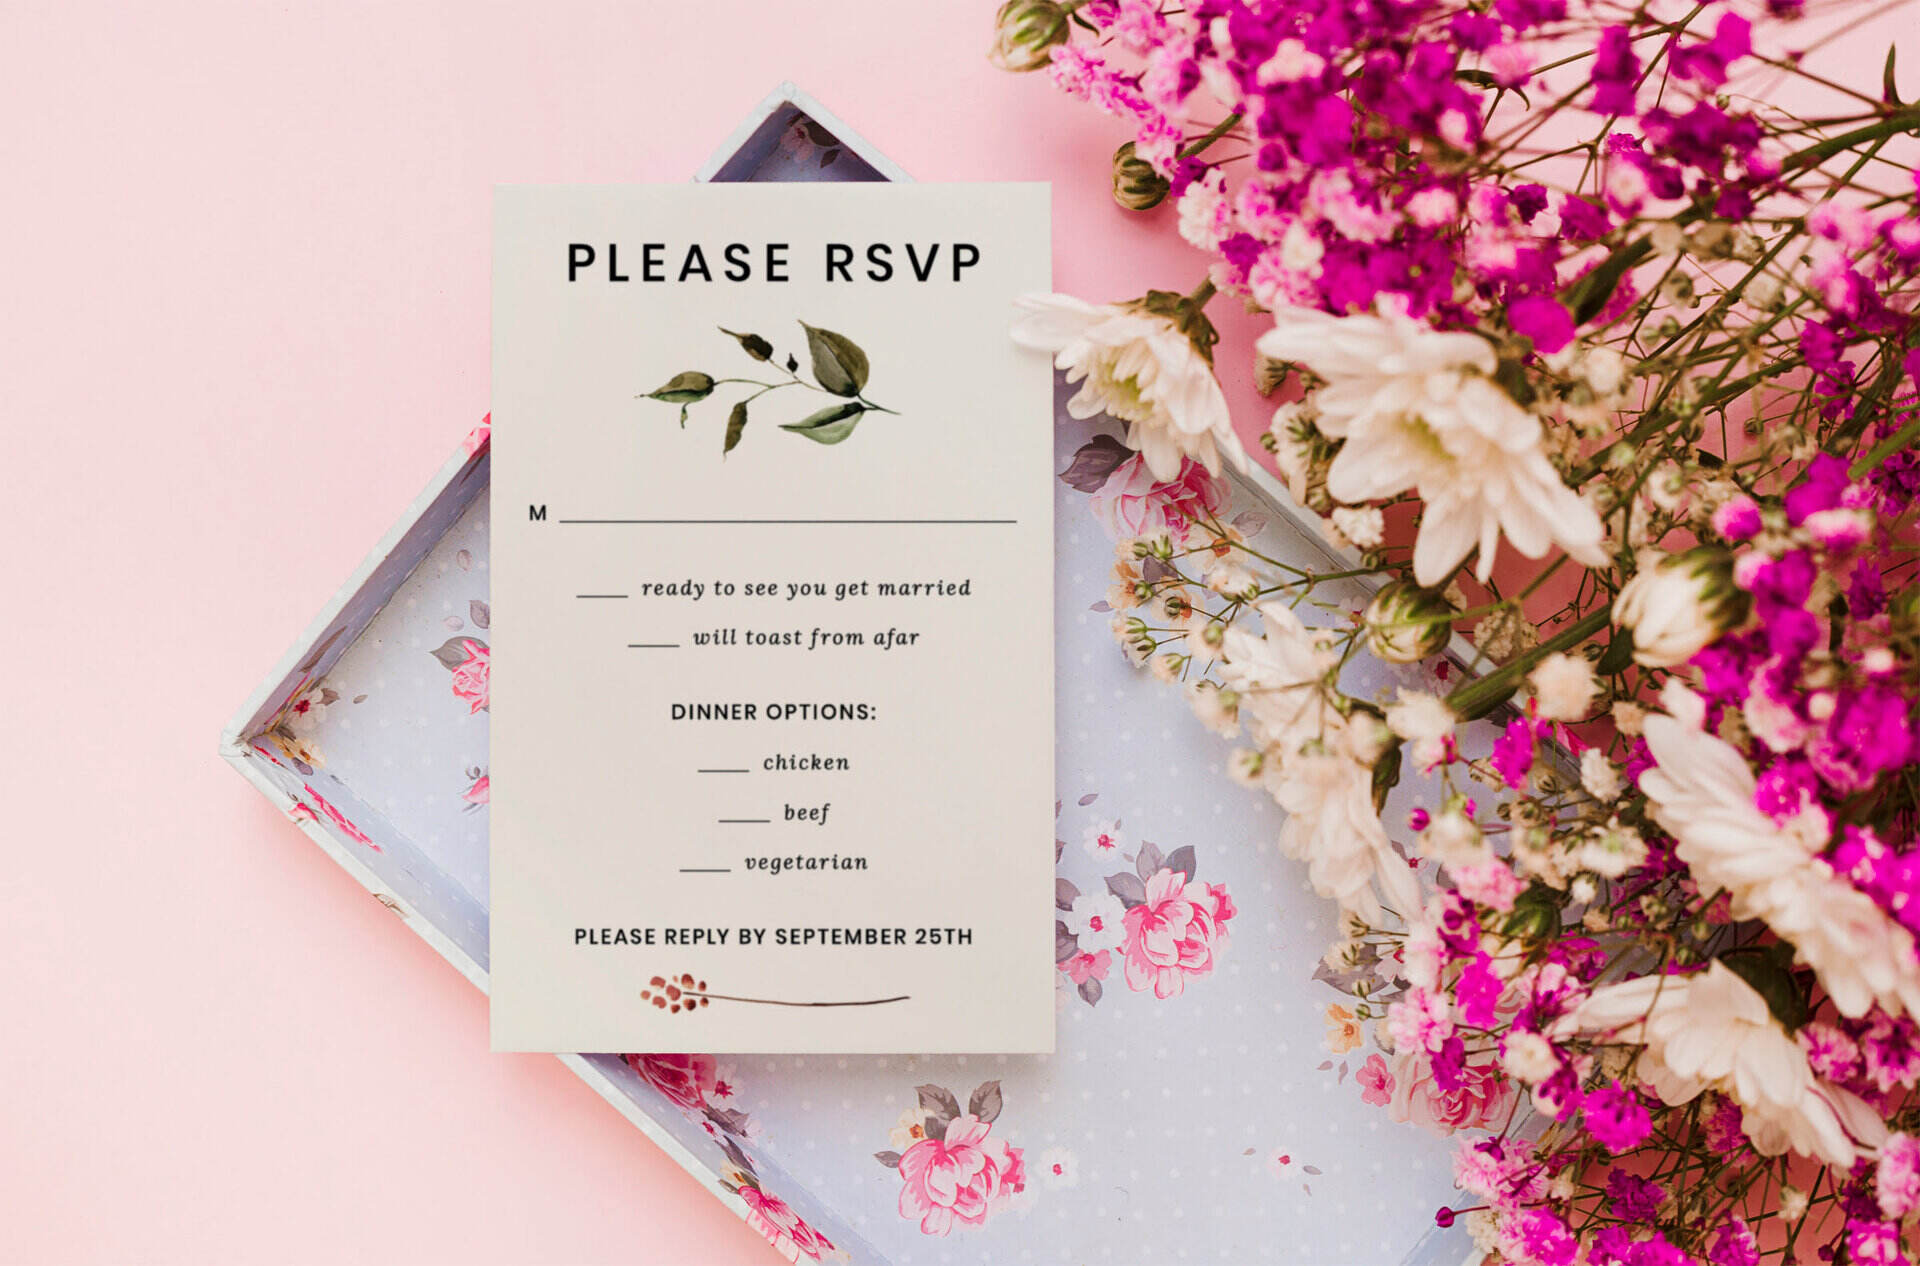 How To Say Yes To A Dinner Invitation